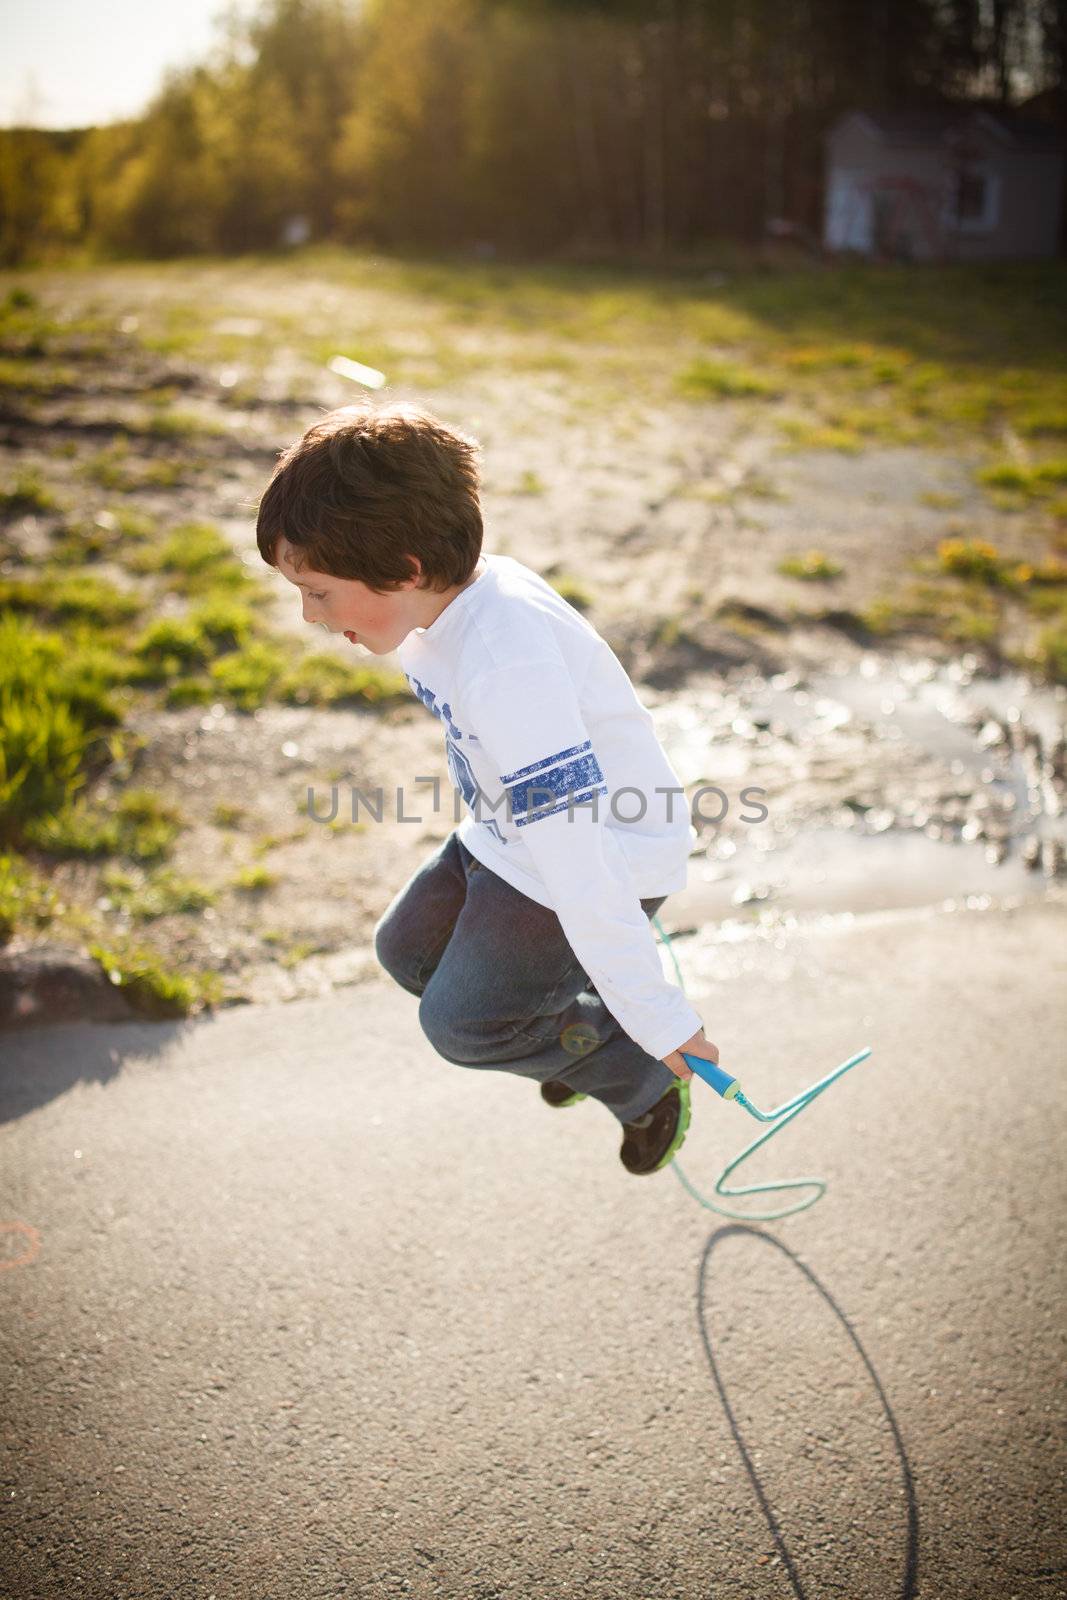 Cute little boy playing jump rope